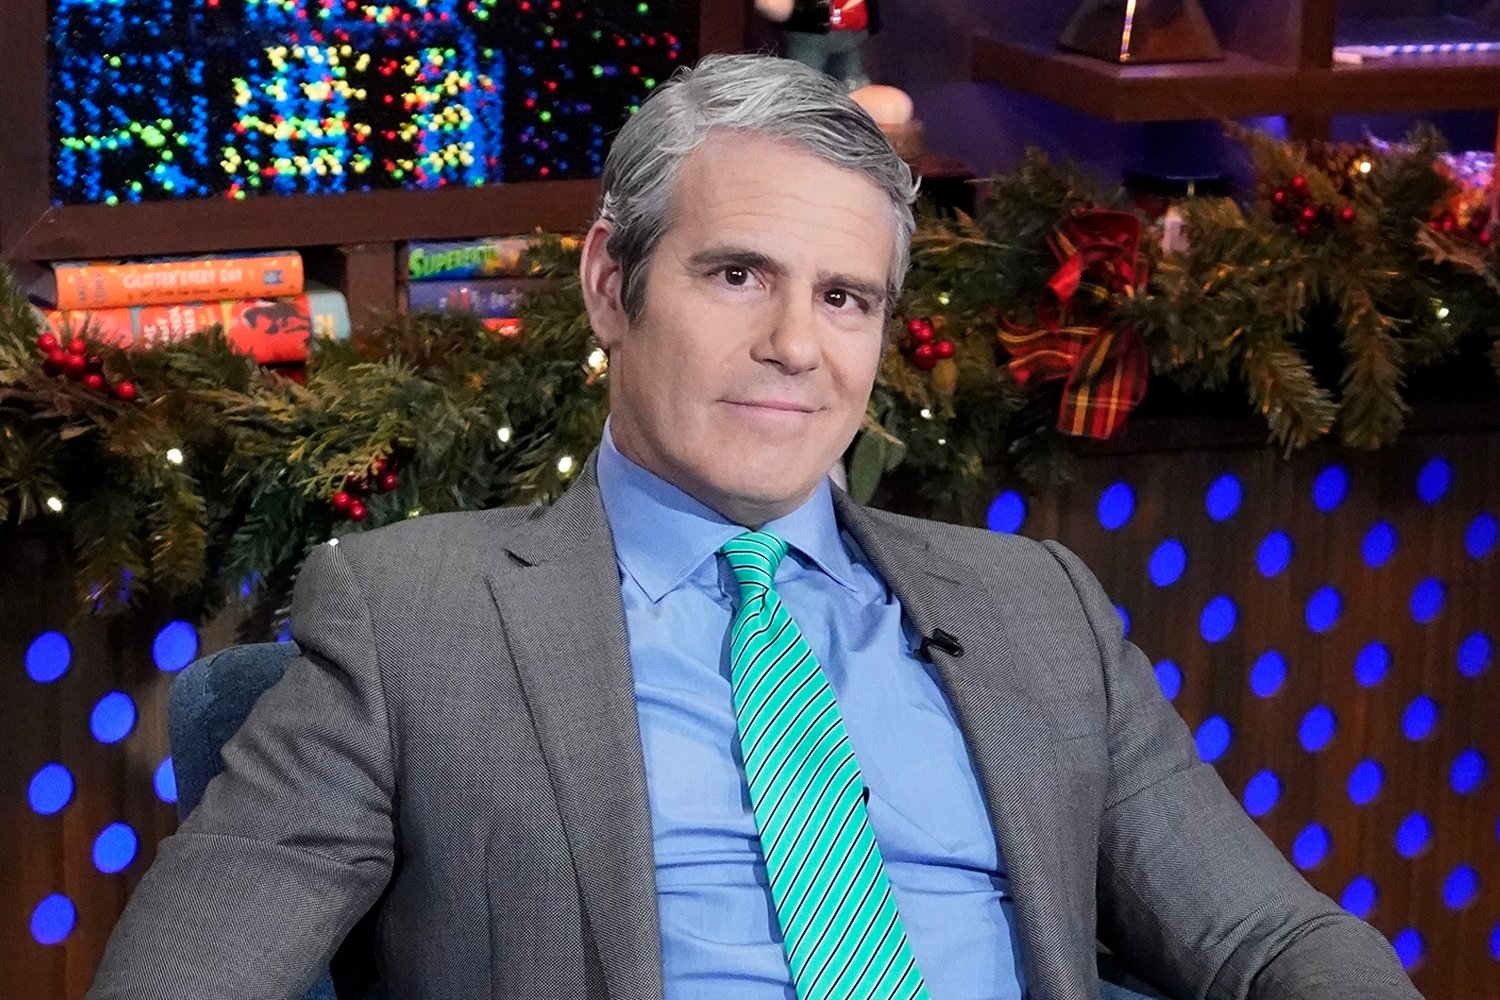 Andy Cohen smirks on the set of 'Watch What Happens Live'